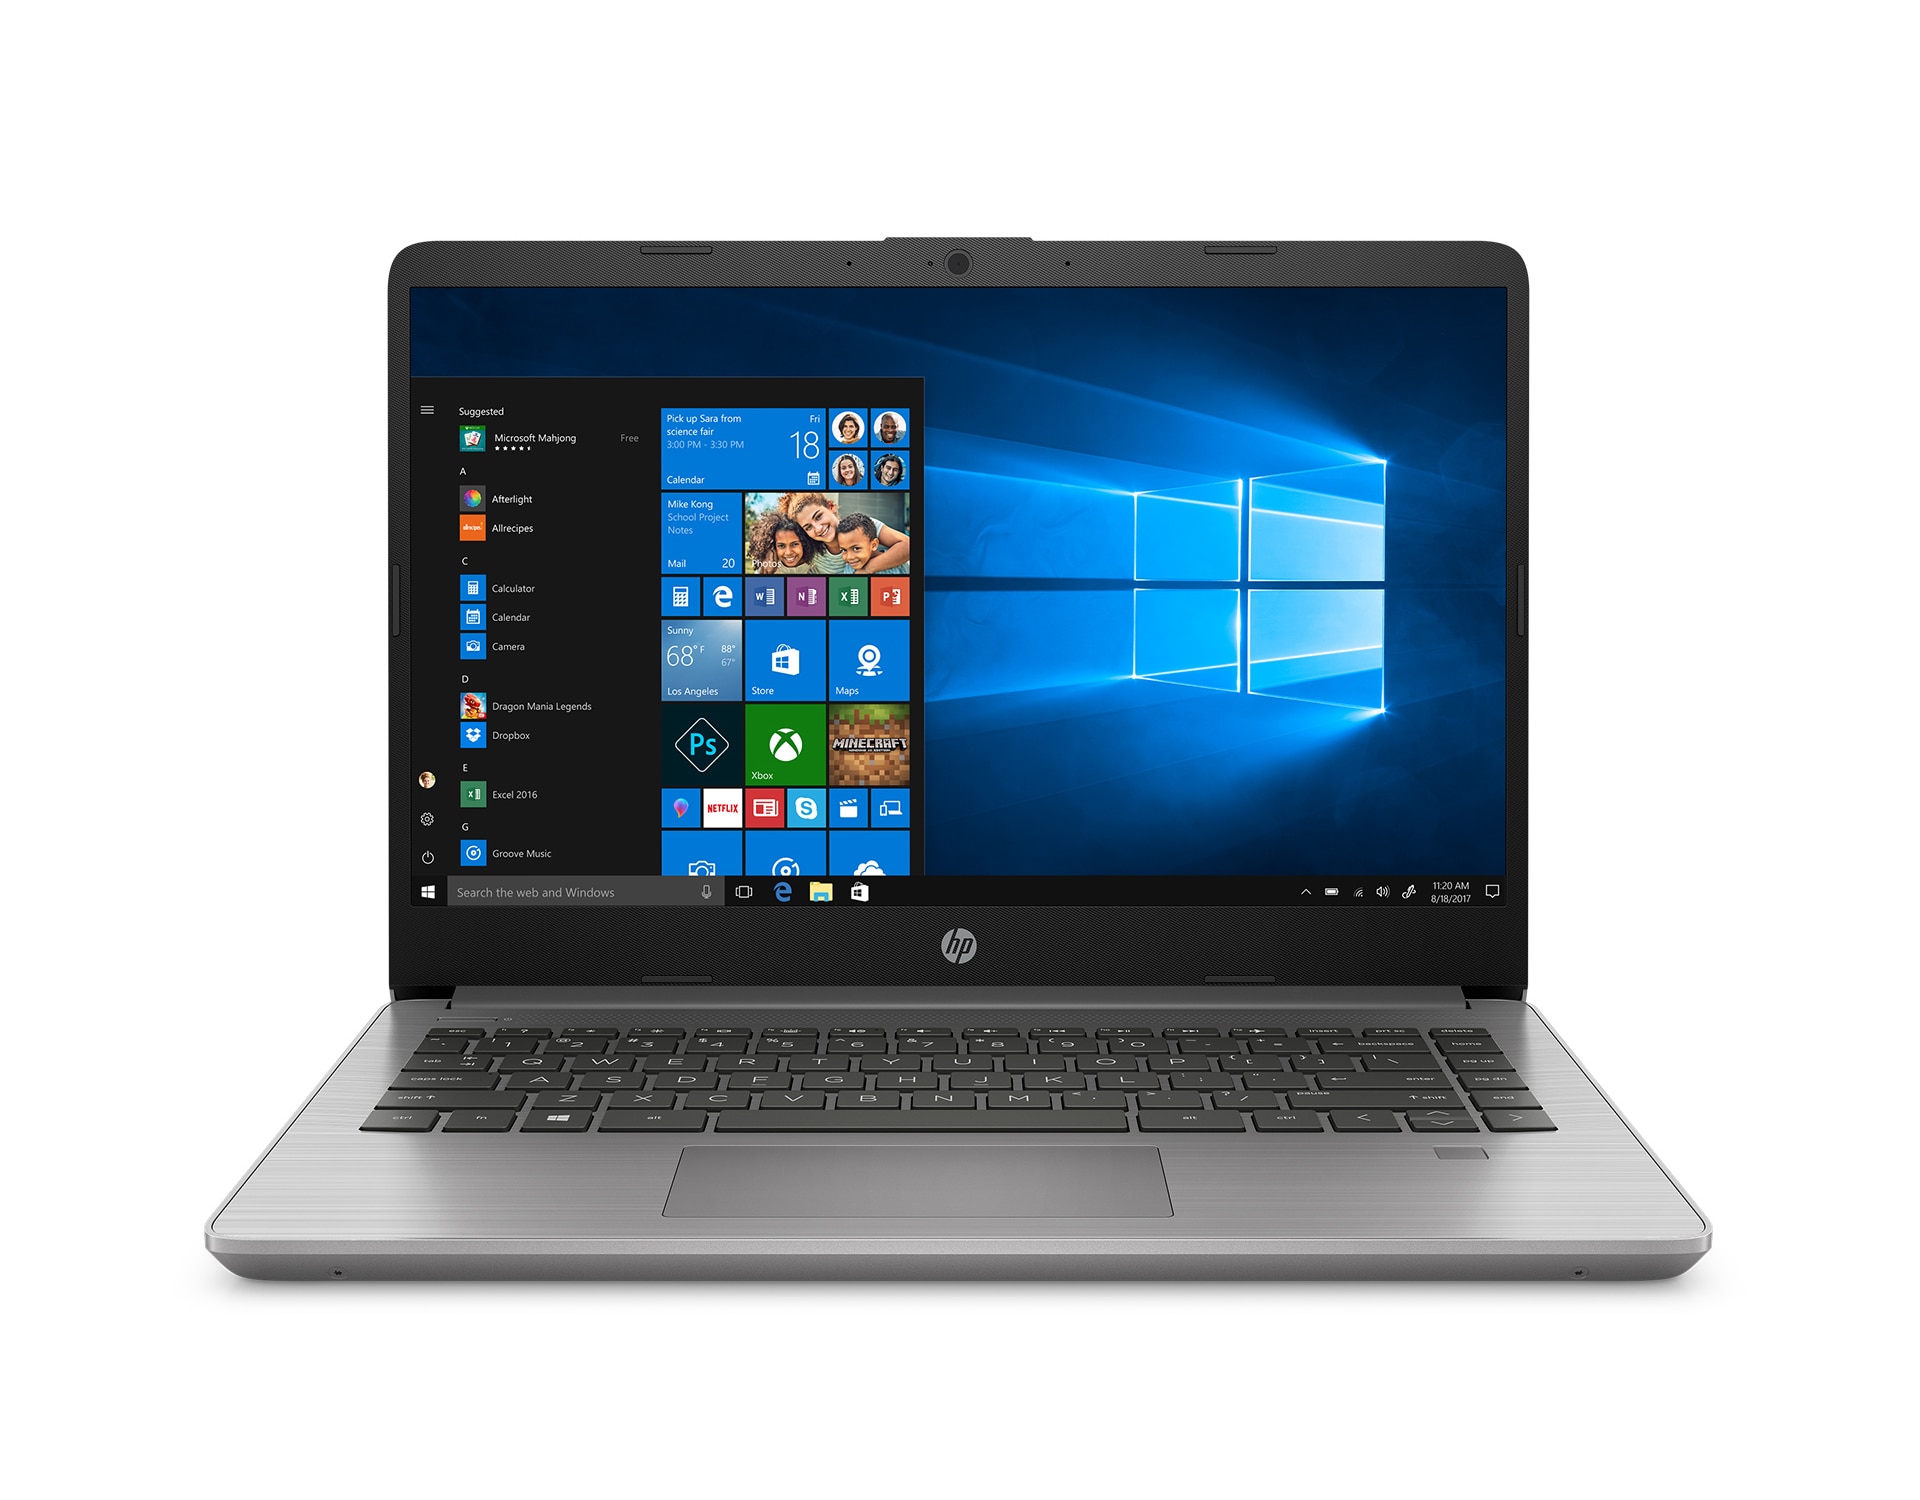 HP 340S G7 Notebook PC（9LY84PA・Core i5/8GB/256/FHD） スタンダードモデル HP　BTO パソコン　格安通販